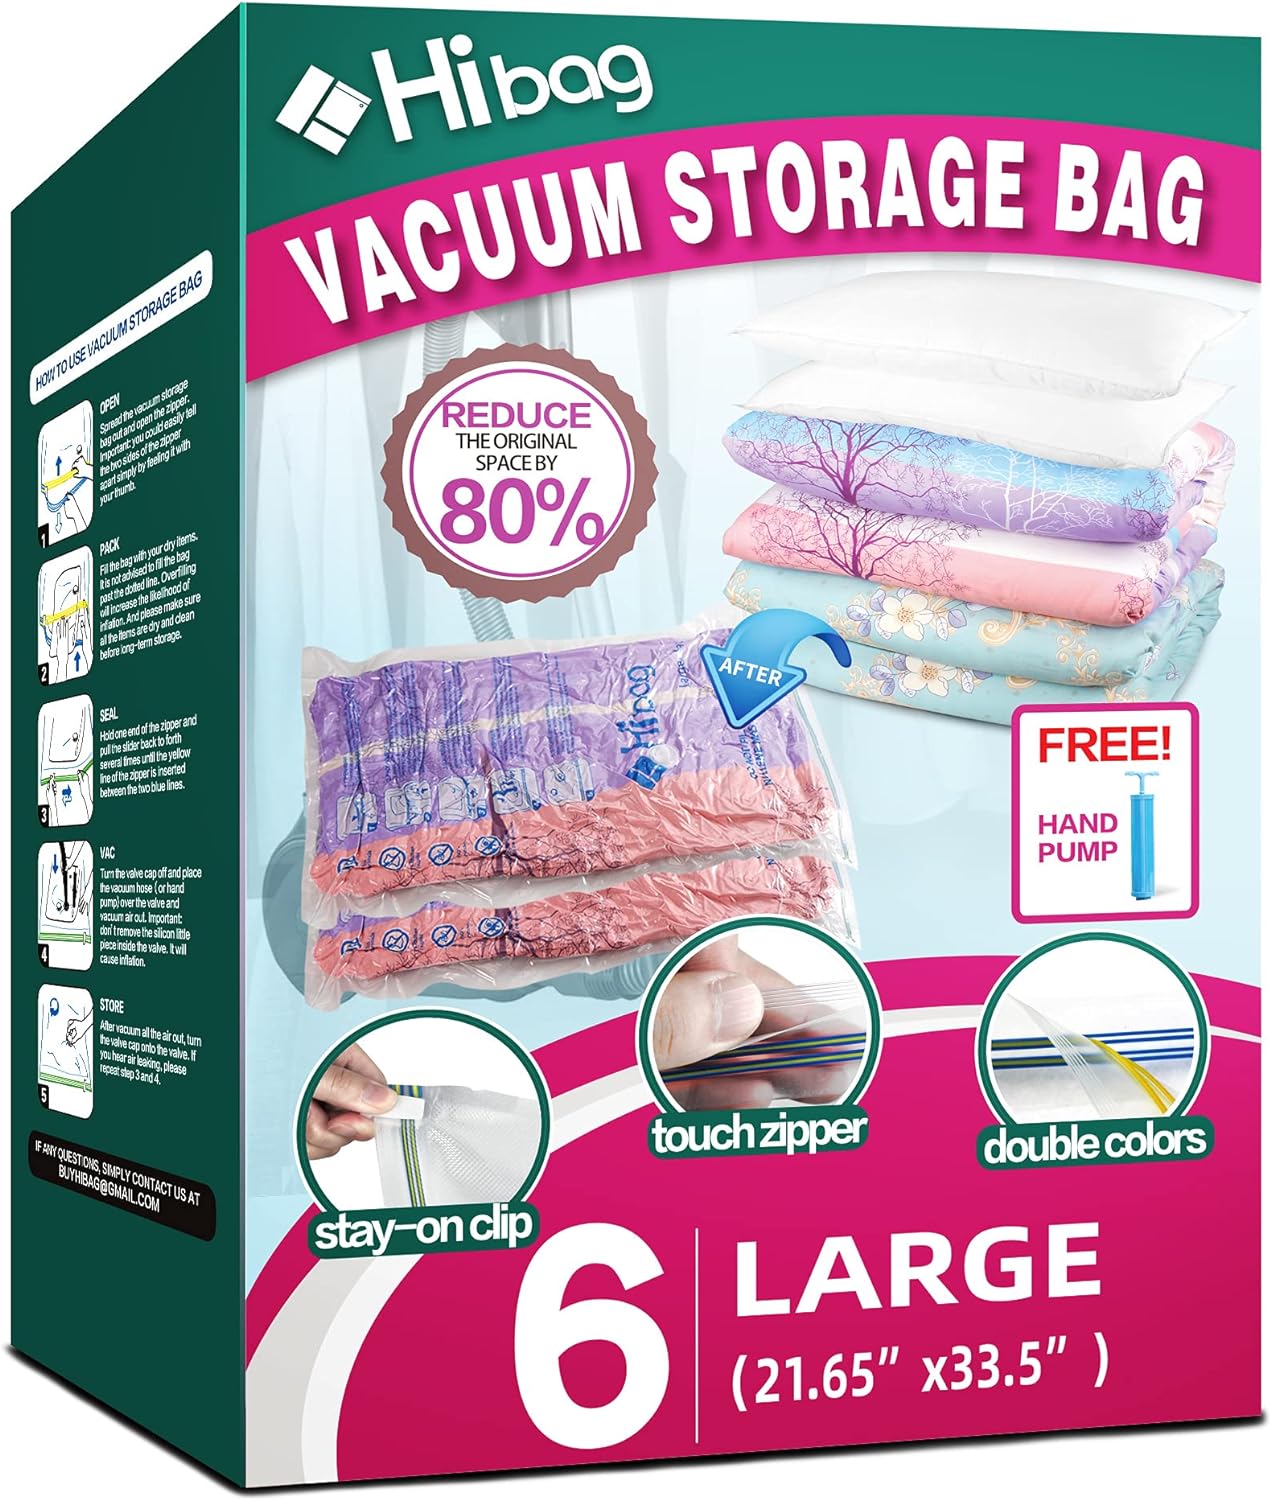 6 Pack Vacuum Storage Bags for Clothes, Clothes Vacuum Bags Save 80% Space, Work with Vacuum Cleaner, Travel Hand Pump Included (6-Large)